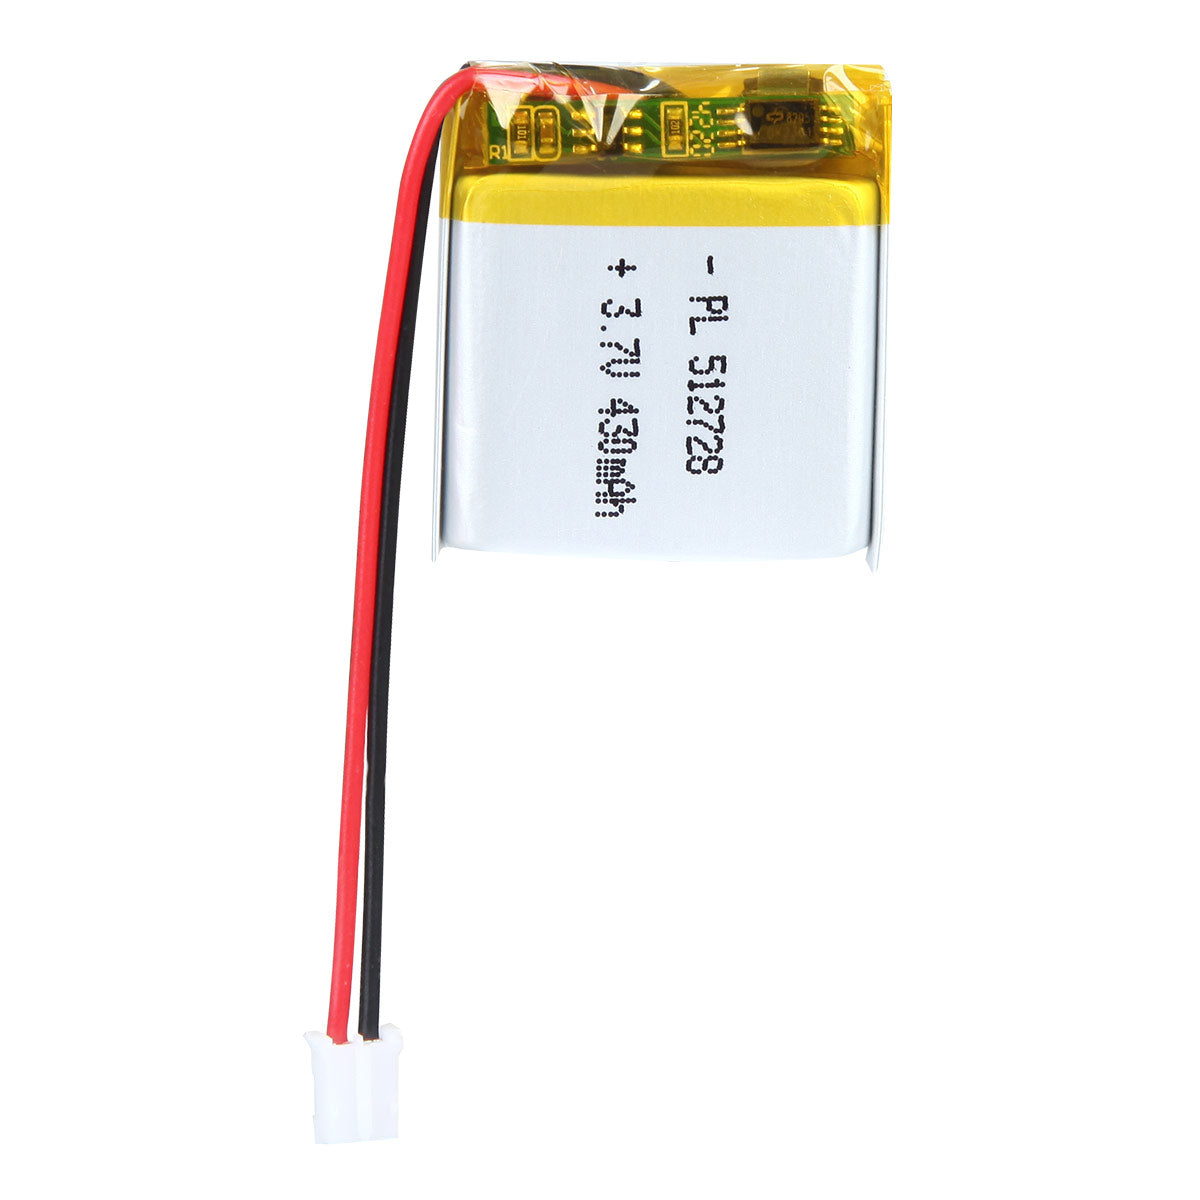 YDL 3.7V 430mAh 512728 Rechargeable Lipo Battery with JST Connector - YDL Battery